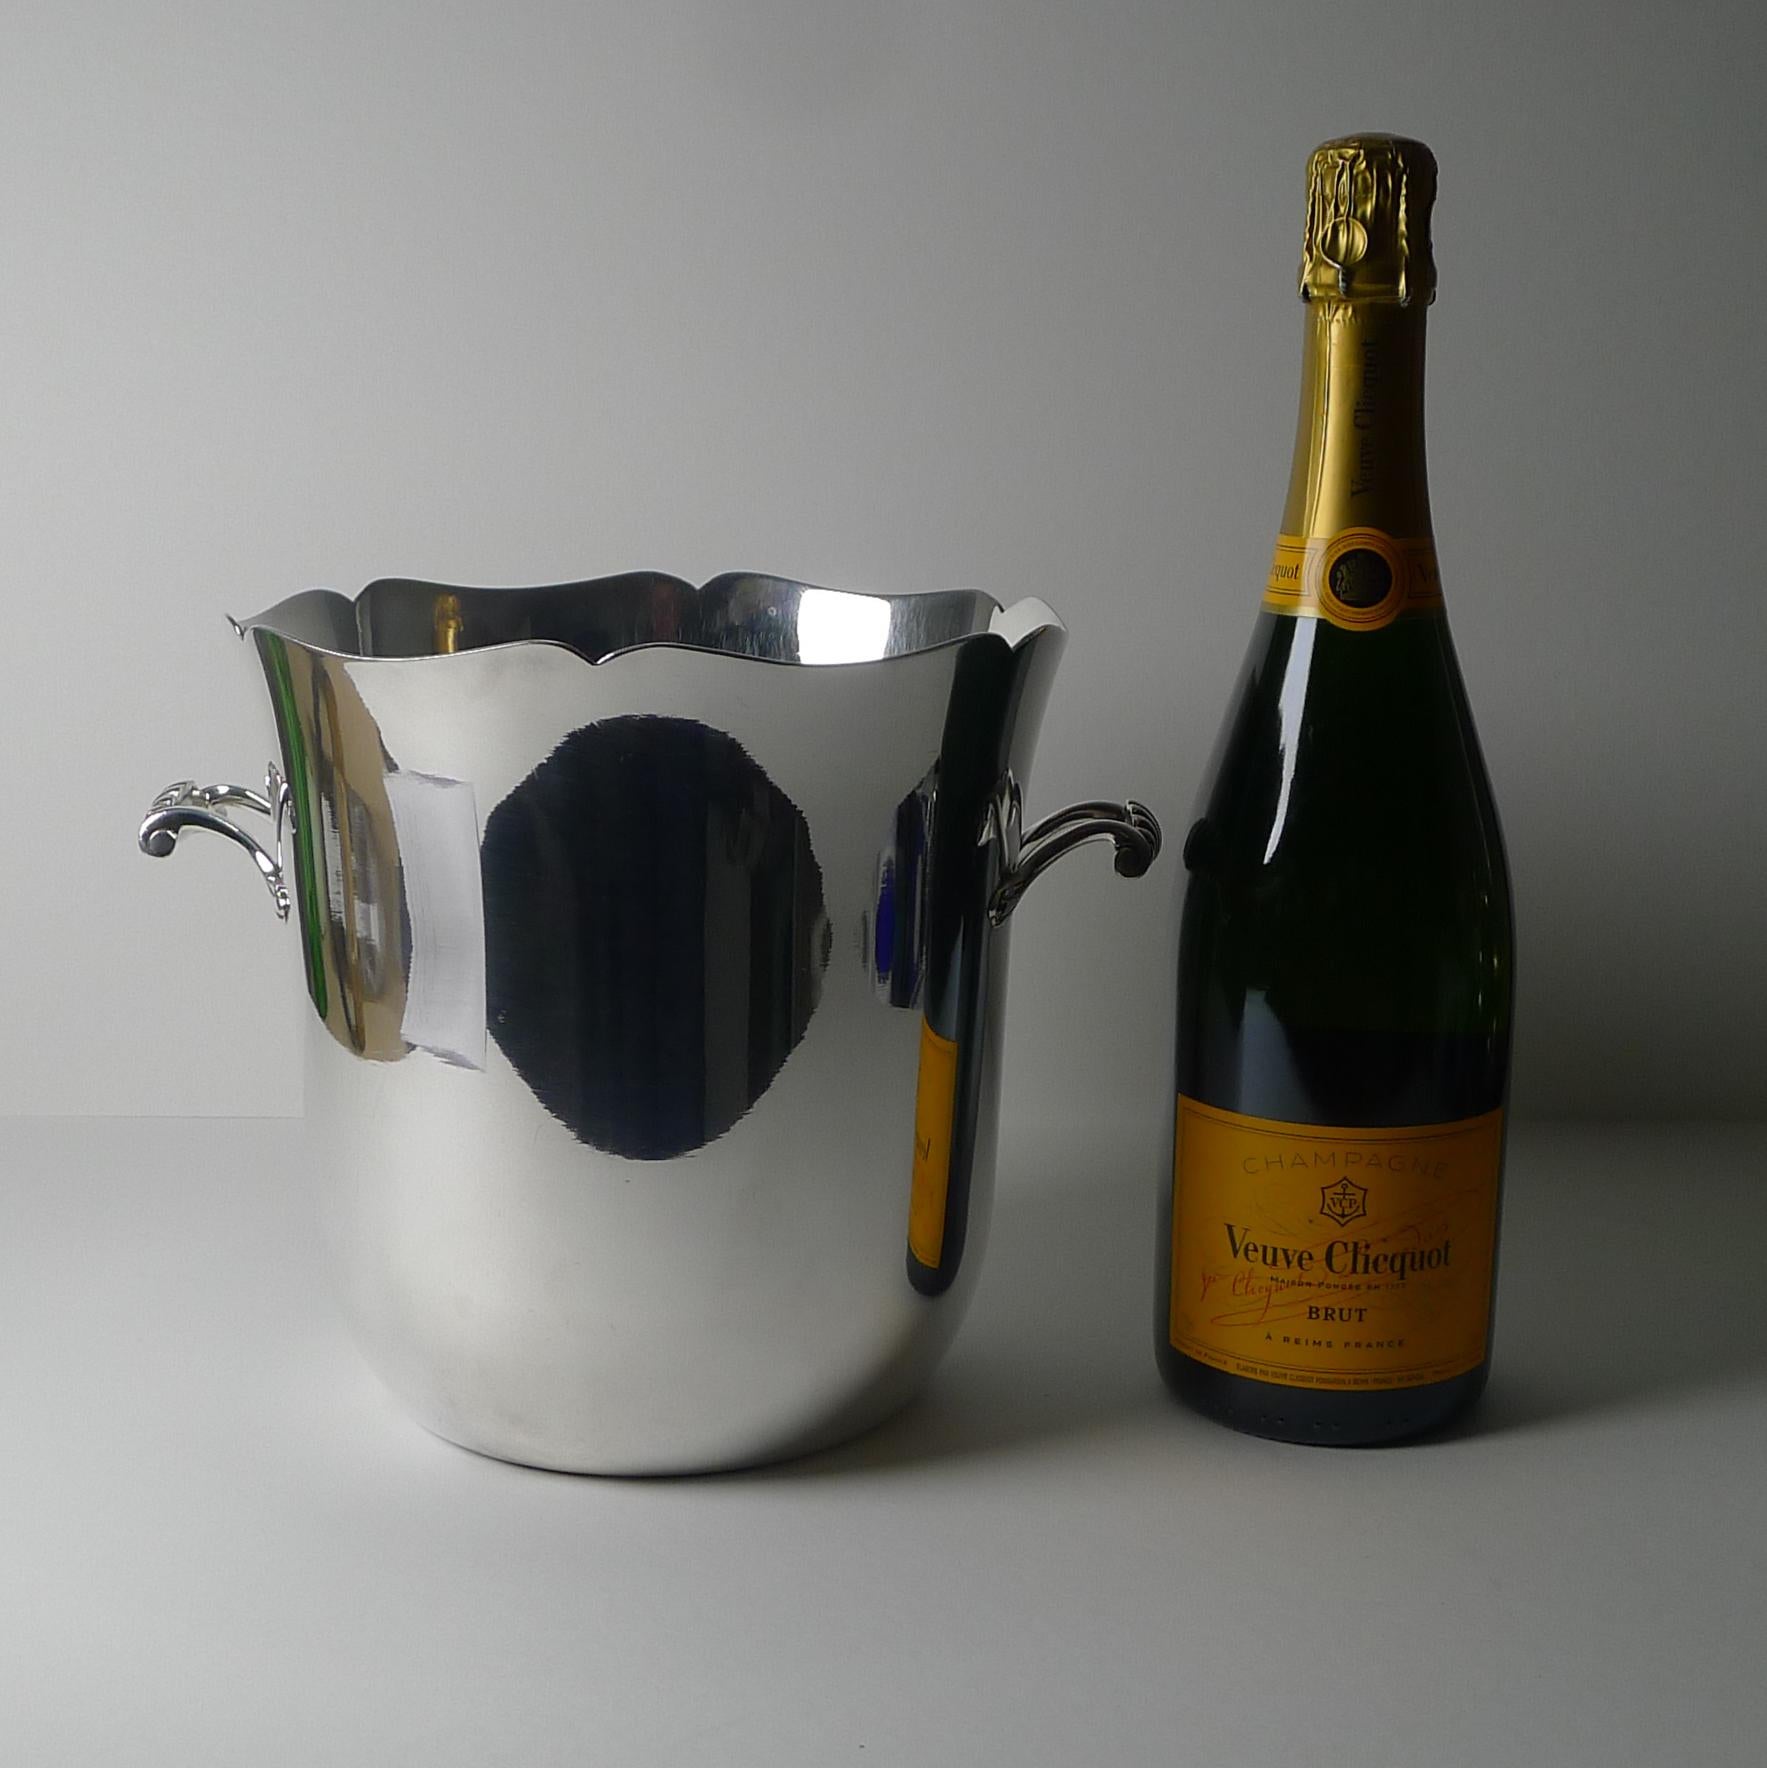 French Silver Plated Champagne Bucket / Wine Cooler by Ercuis, Paris 3